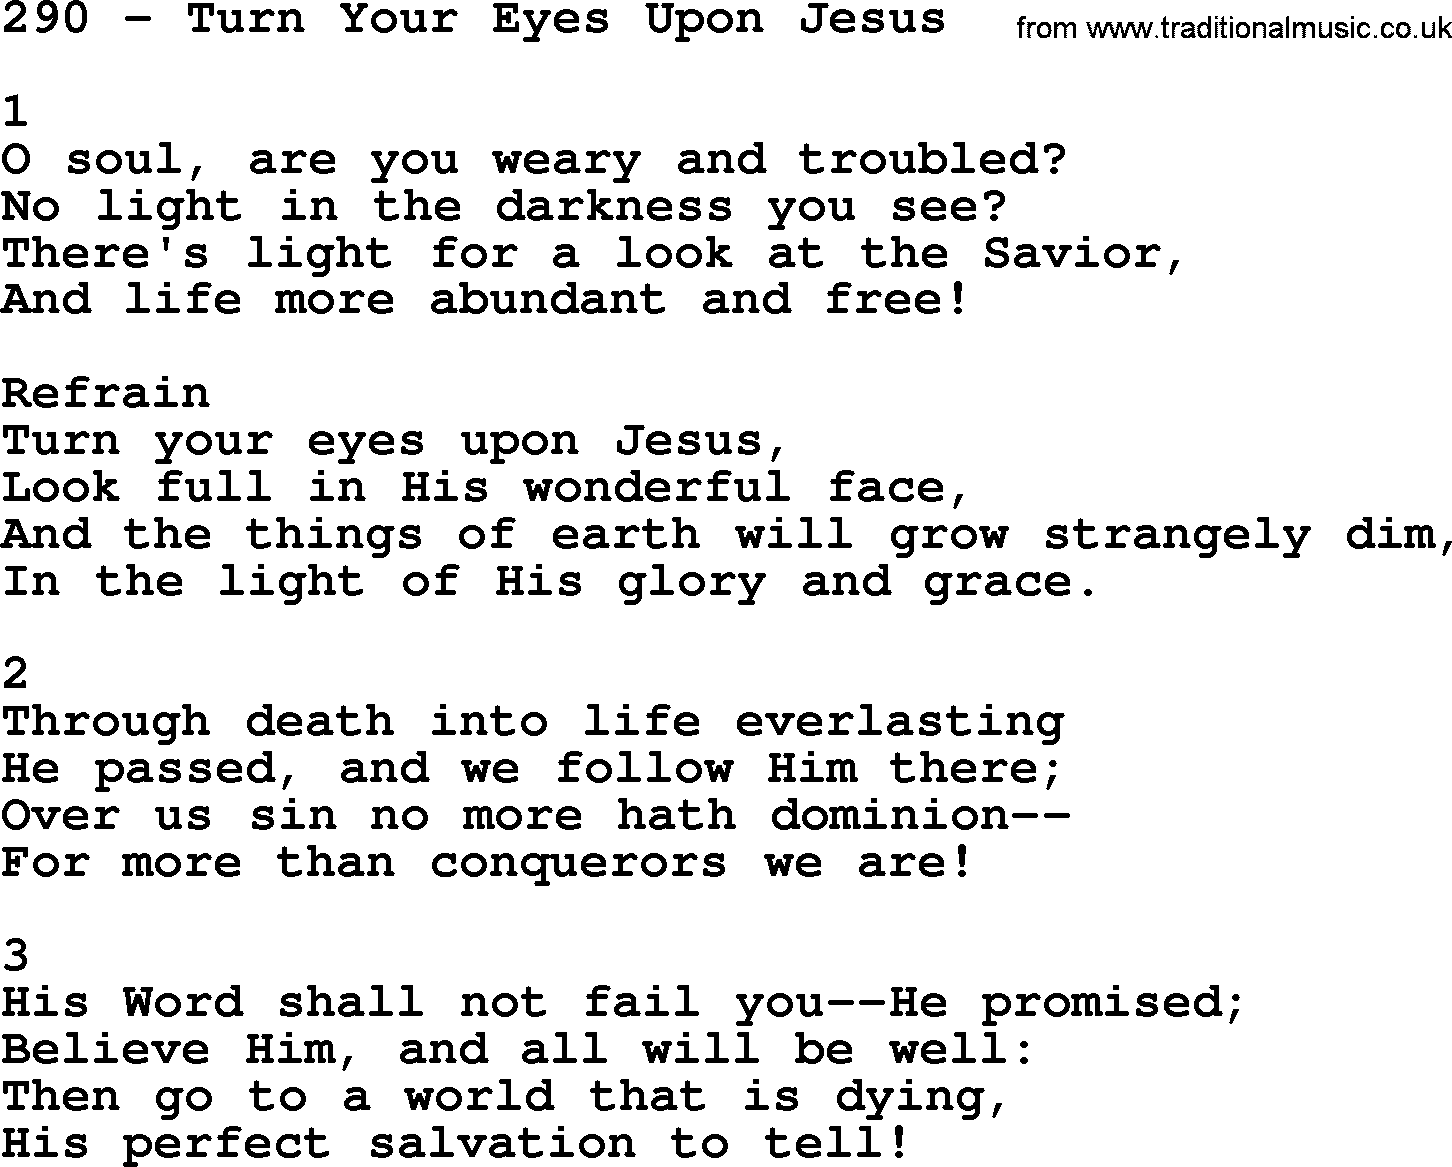 Complete Adventis Hymnal, title: 290-Turn Your Eyes Upon Jesus, with lyrics, midi, mp3, powerpoints(PPT) and PDF,